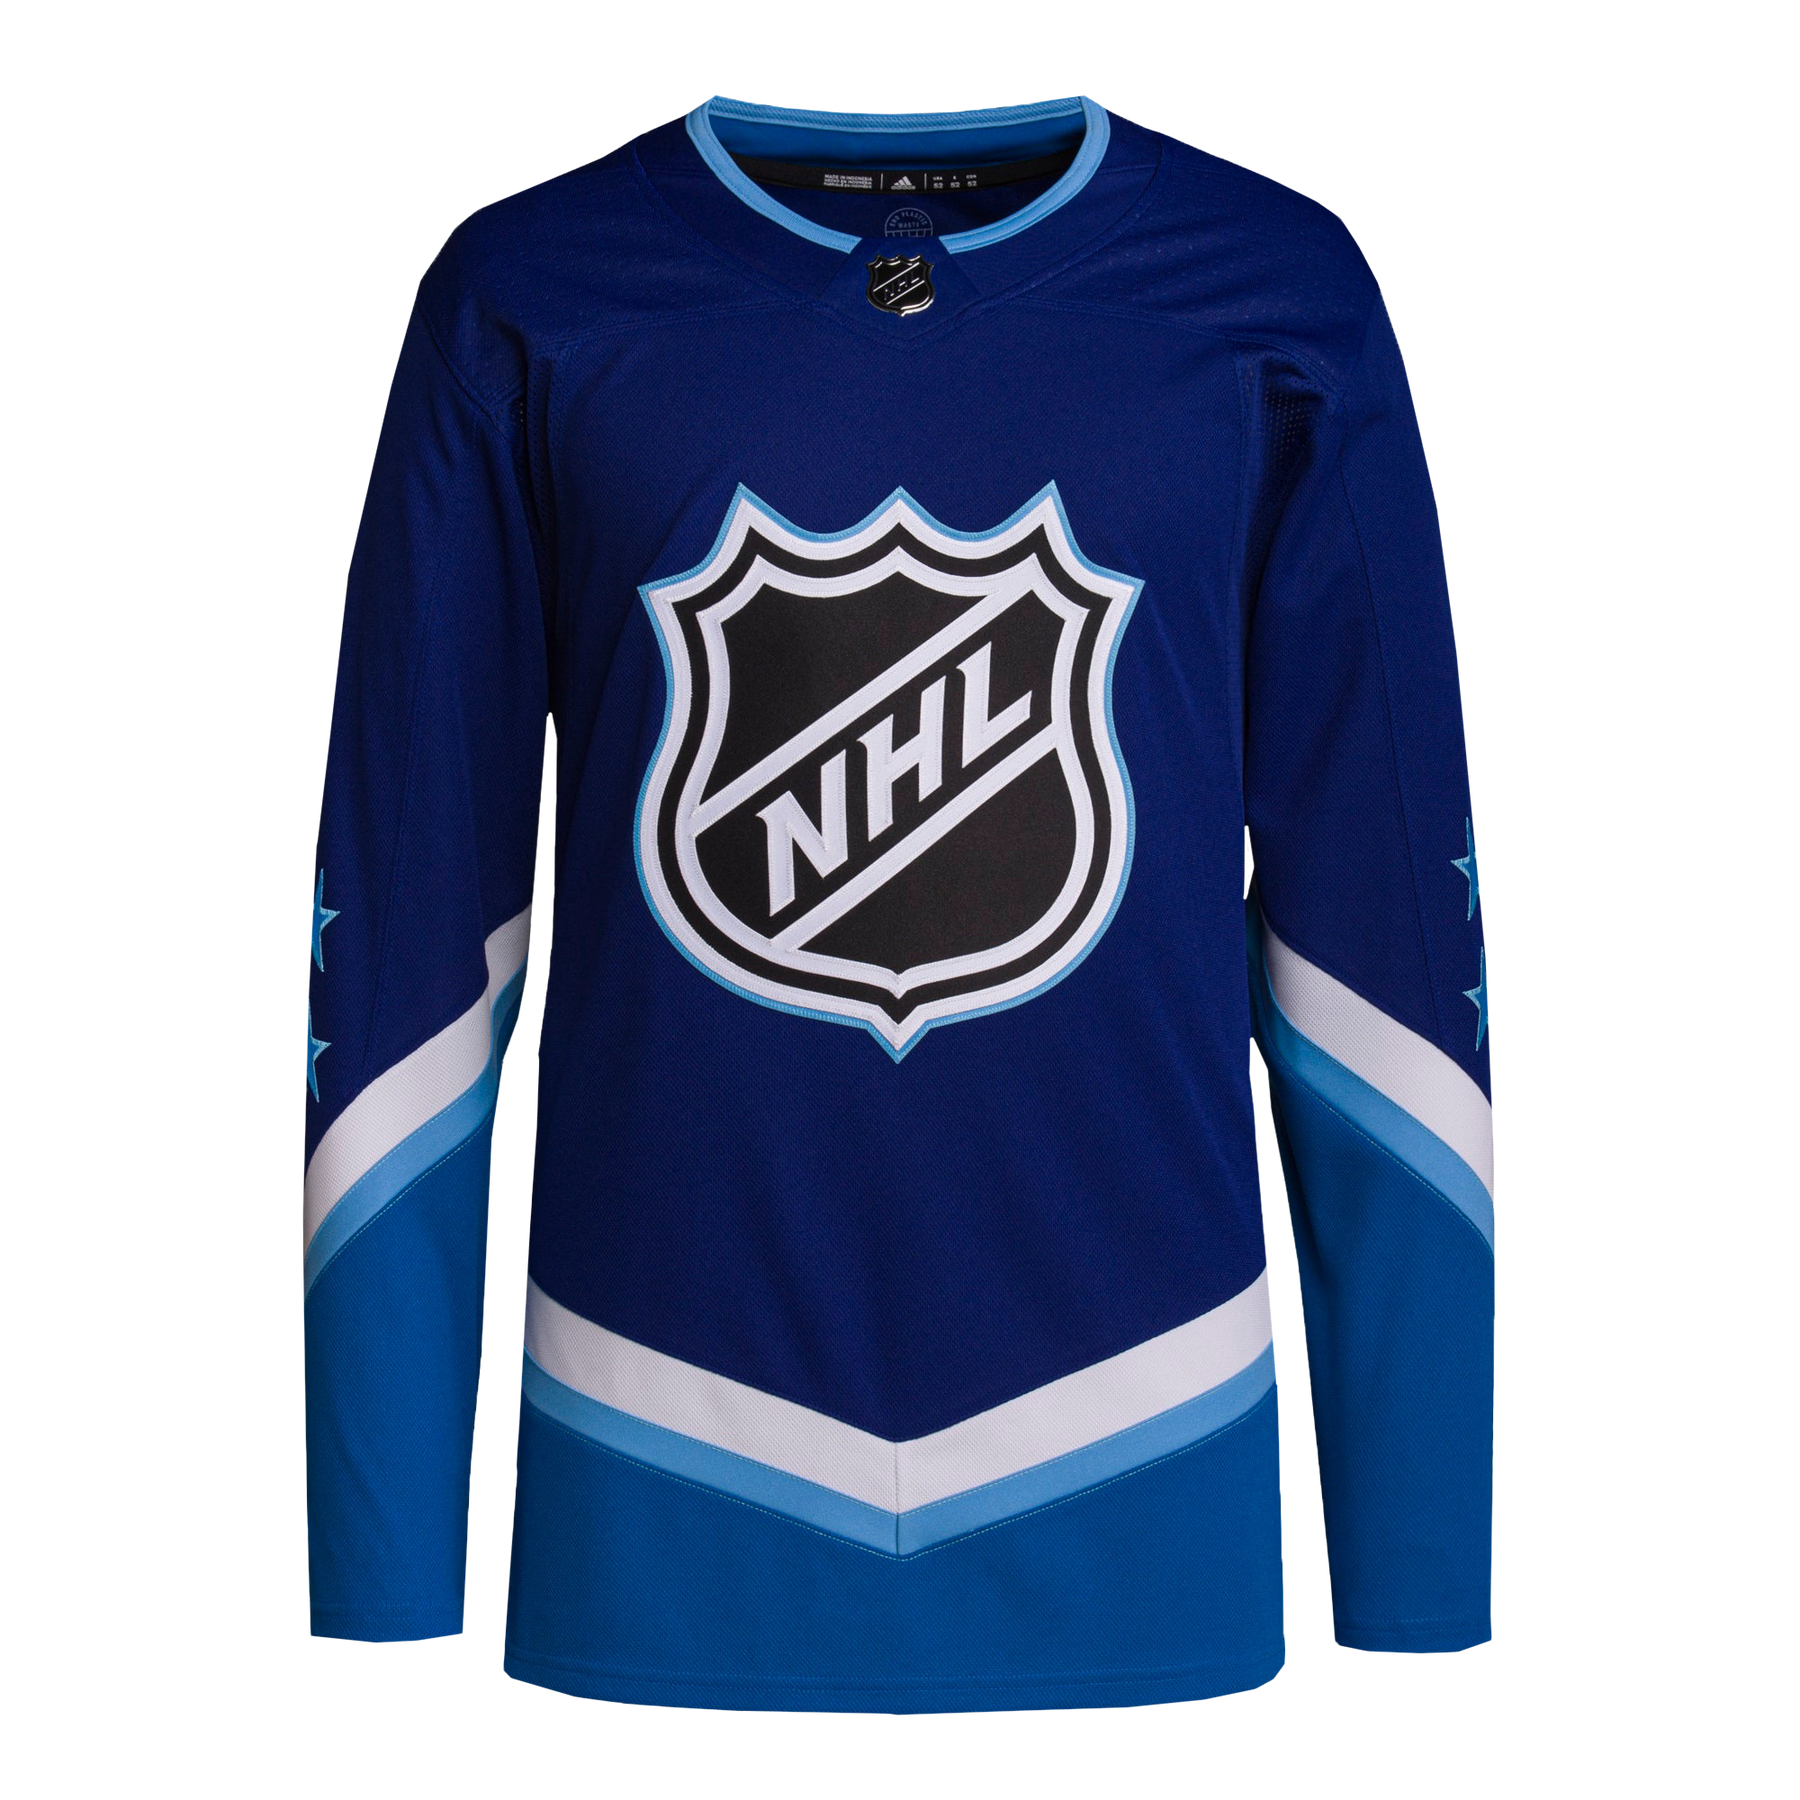 Finds! Full Moon Jerseys Adidas Made in Canada NHL All-Star